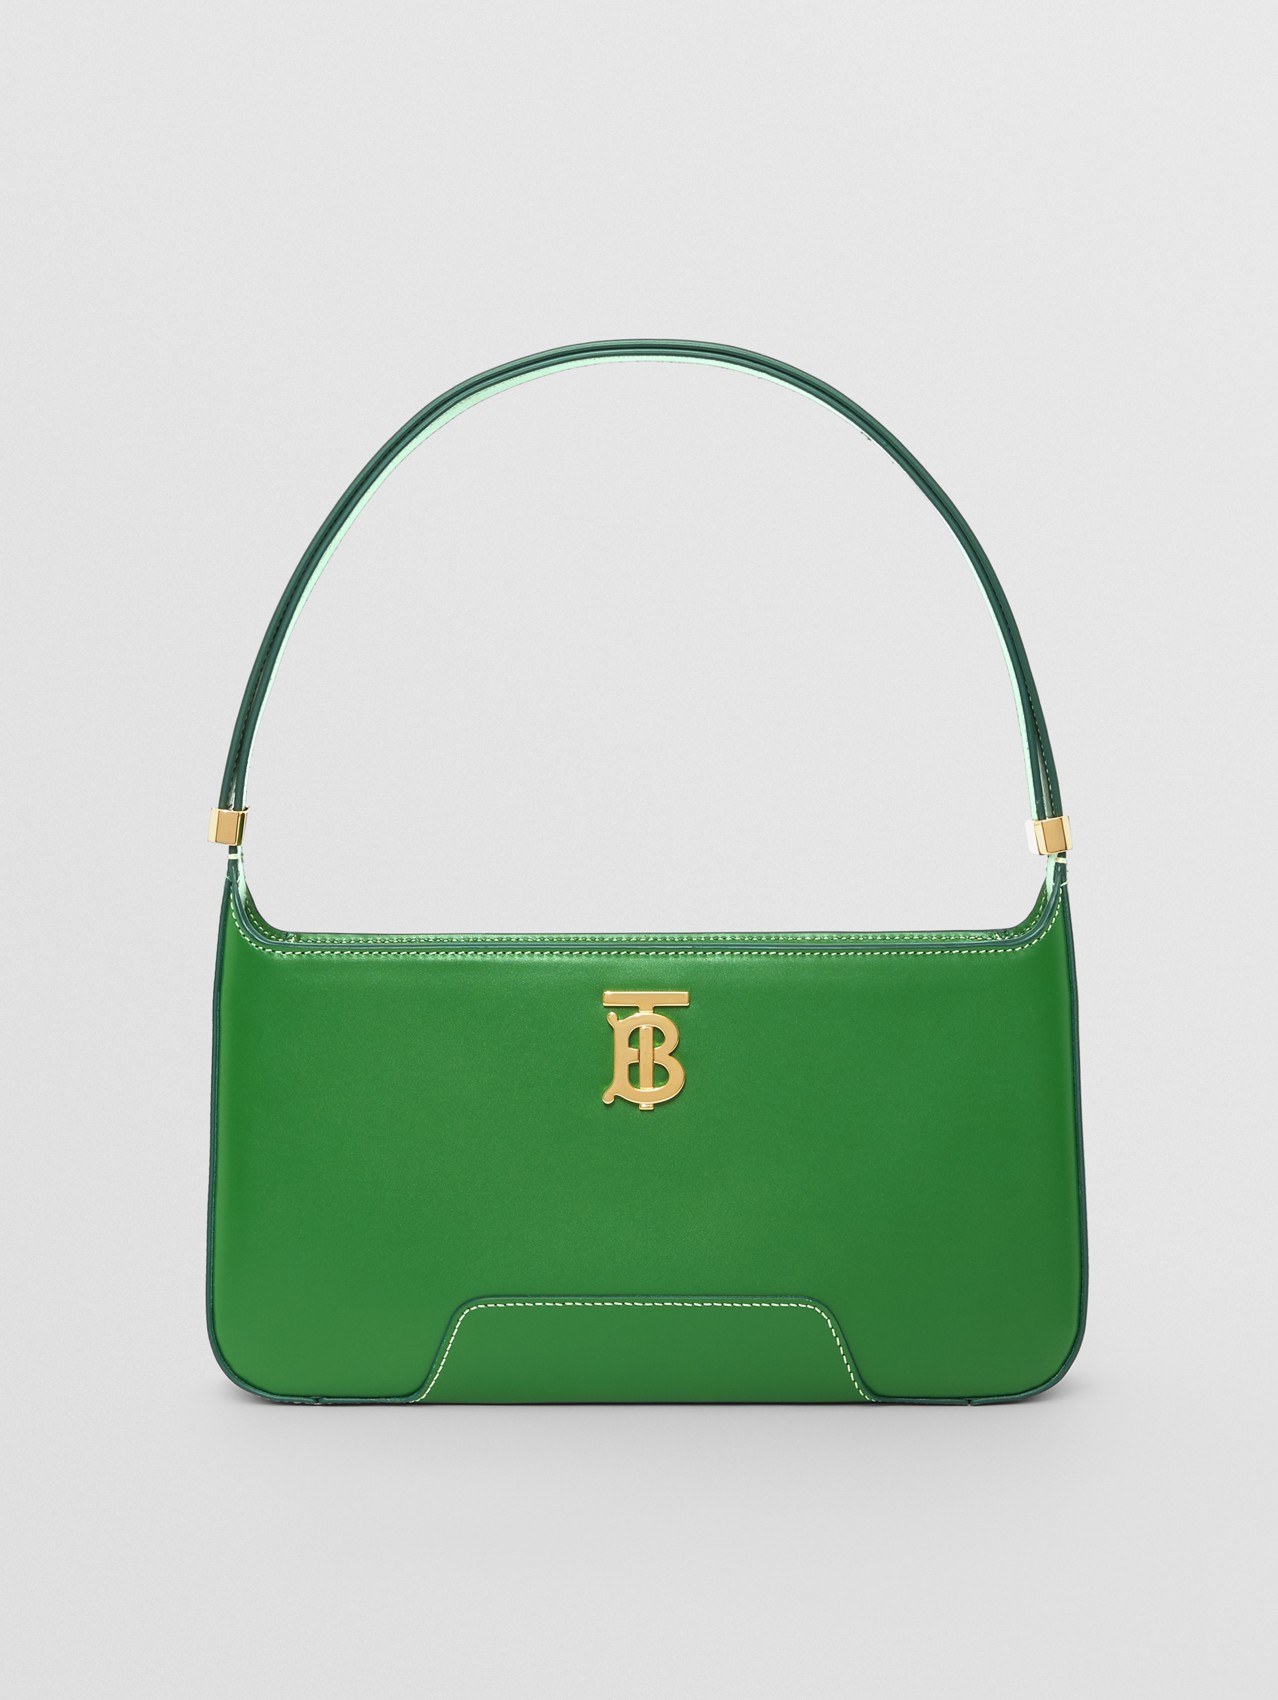 Leather TB Shoulder Bag – Online Exclusive in Ivy Green